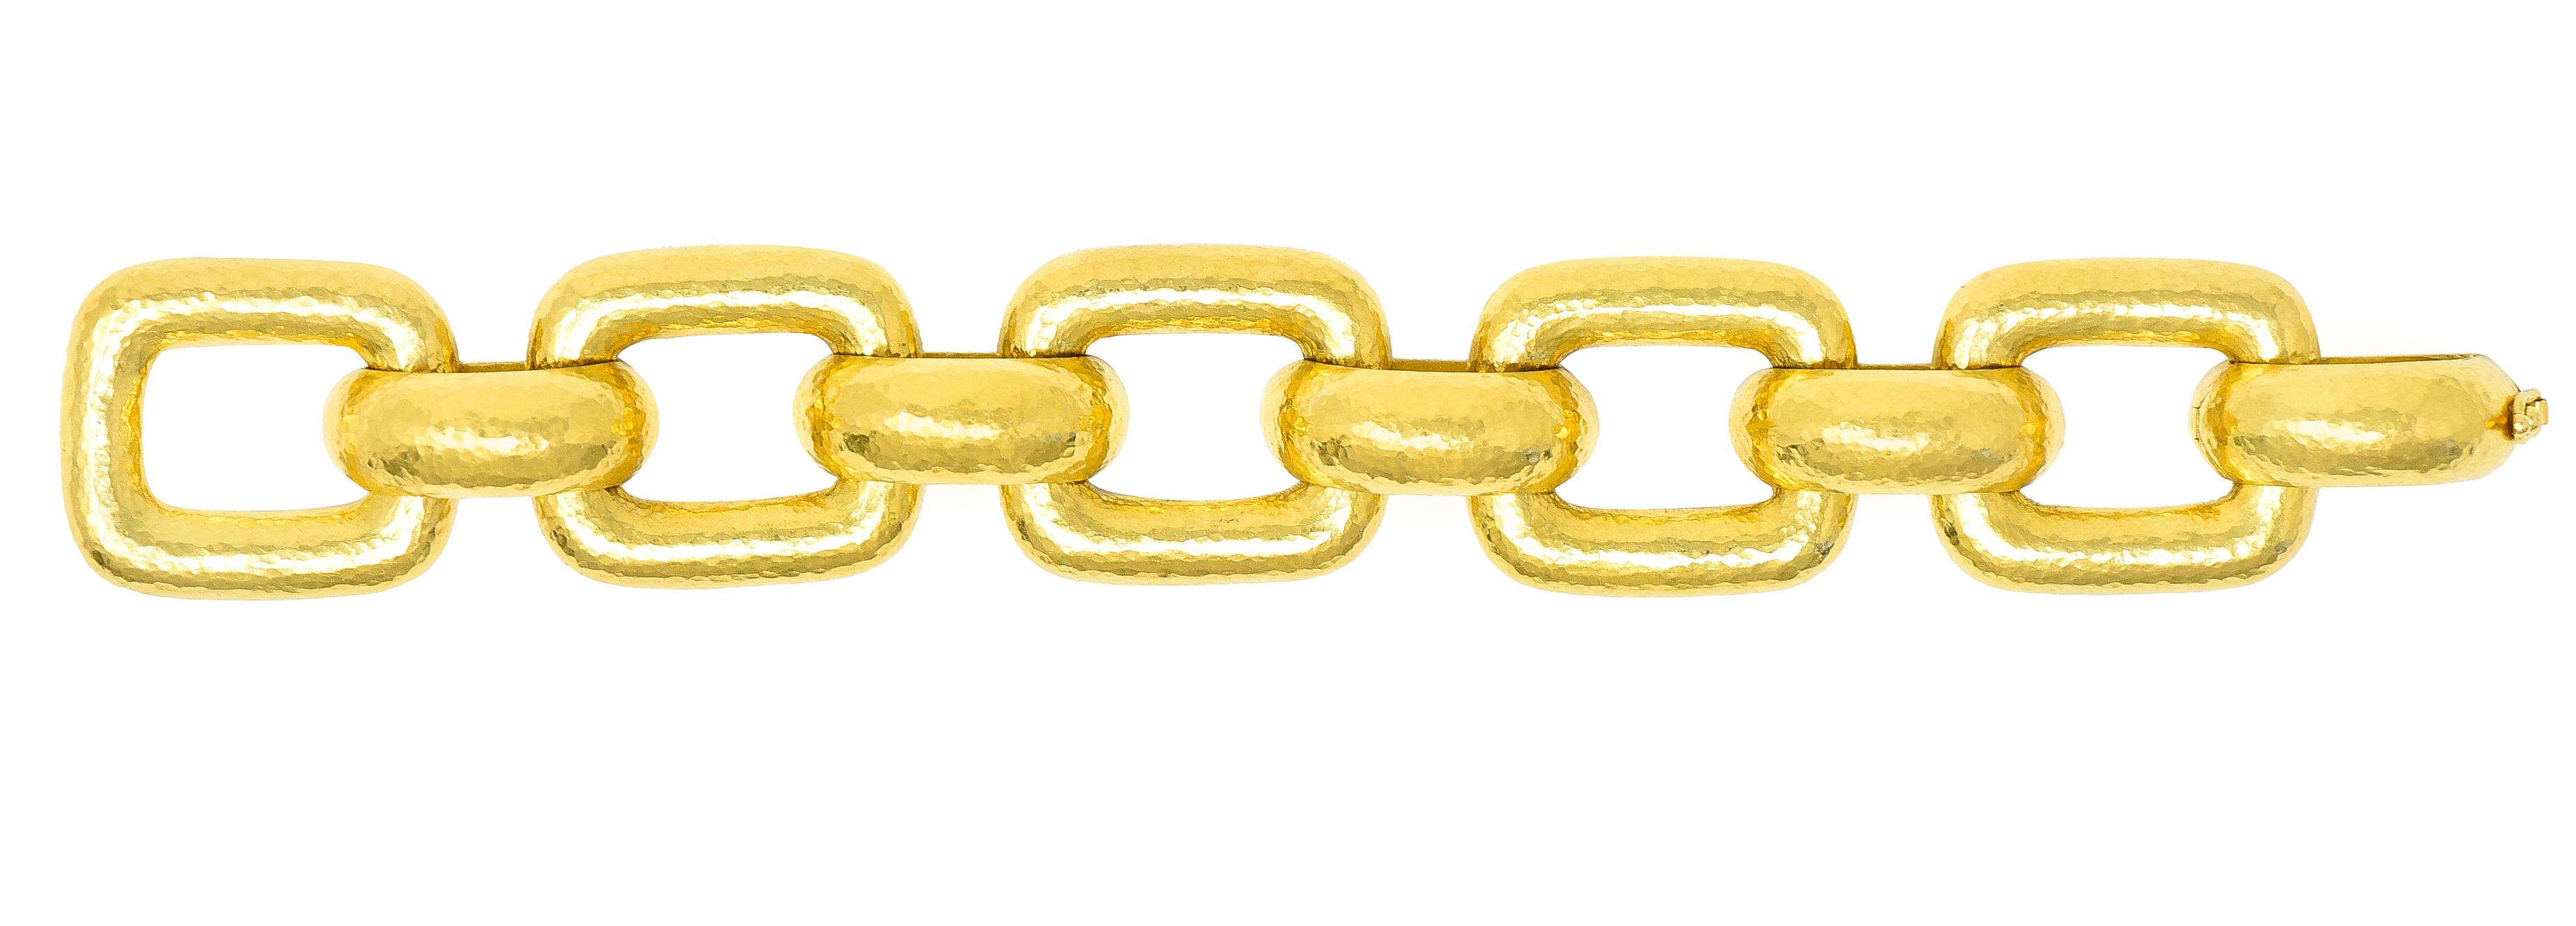 Bracelet is designed as substantial rectangular links alternating with half round links. Rounded with flat backs. With hammered gold texture throughout. Stamped 19k for 19 karat gold. With maker's mark for Elizabeth Locke. Circa: 1980's from the